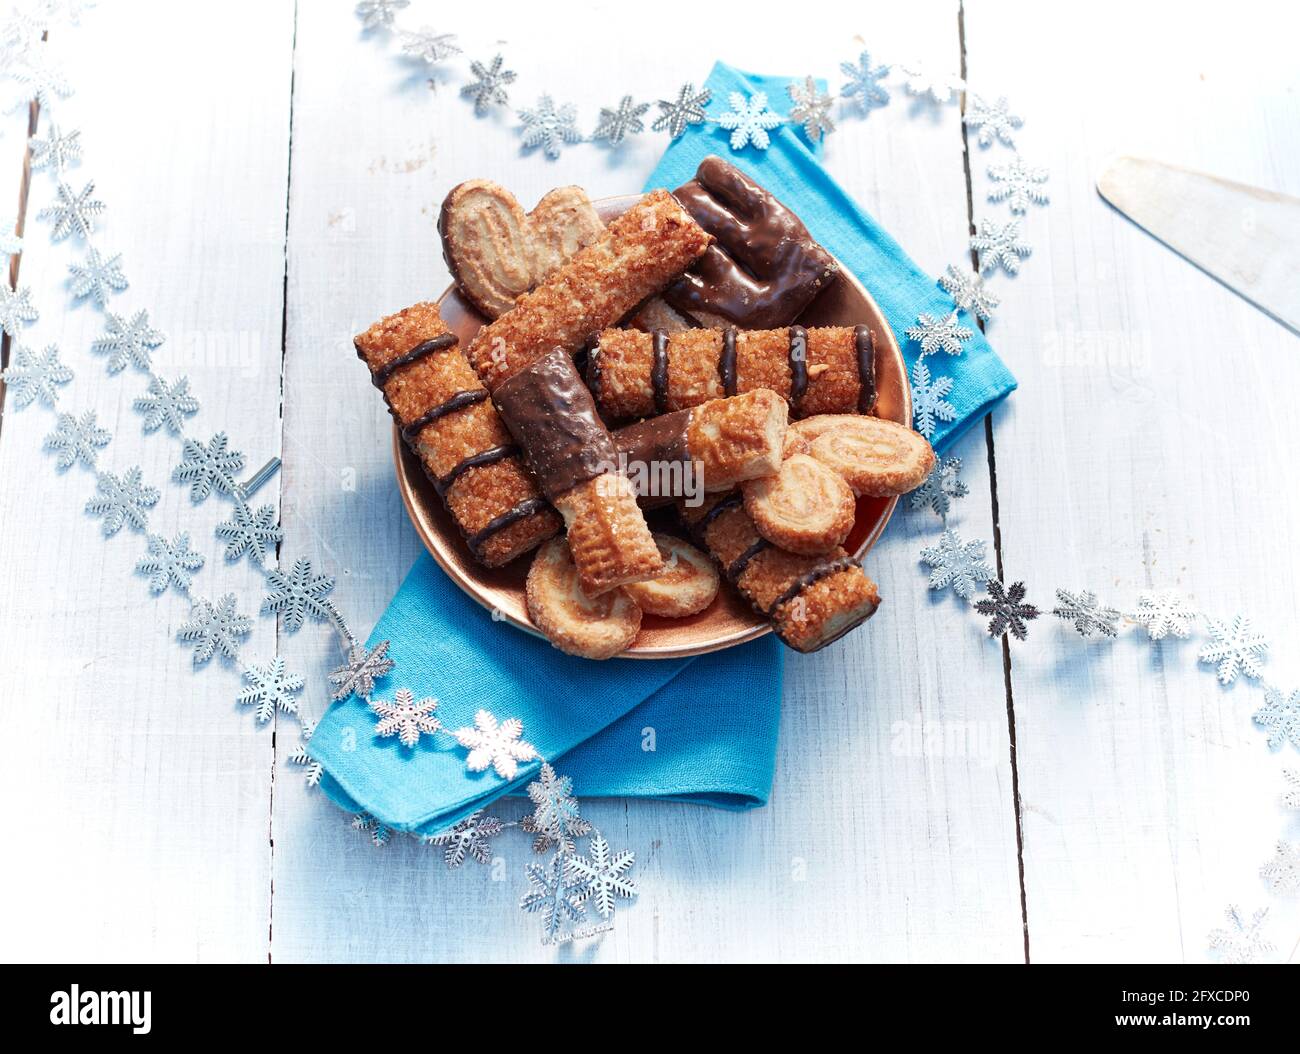 Plate of cookies with chocolate on table with Christmas decor Stock Photo